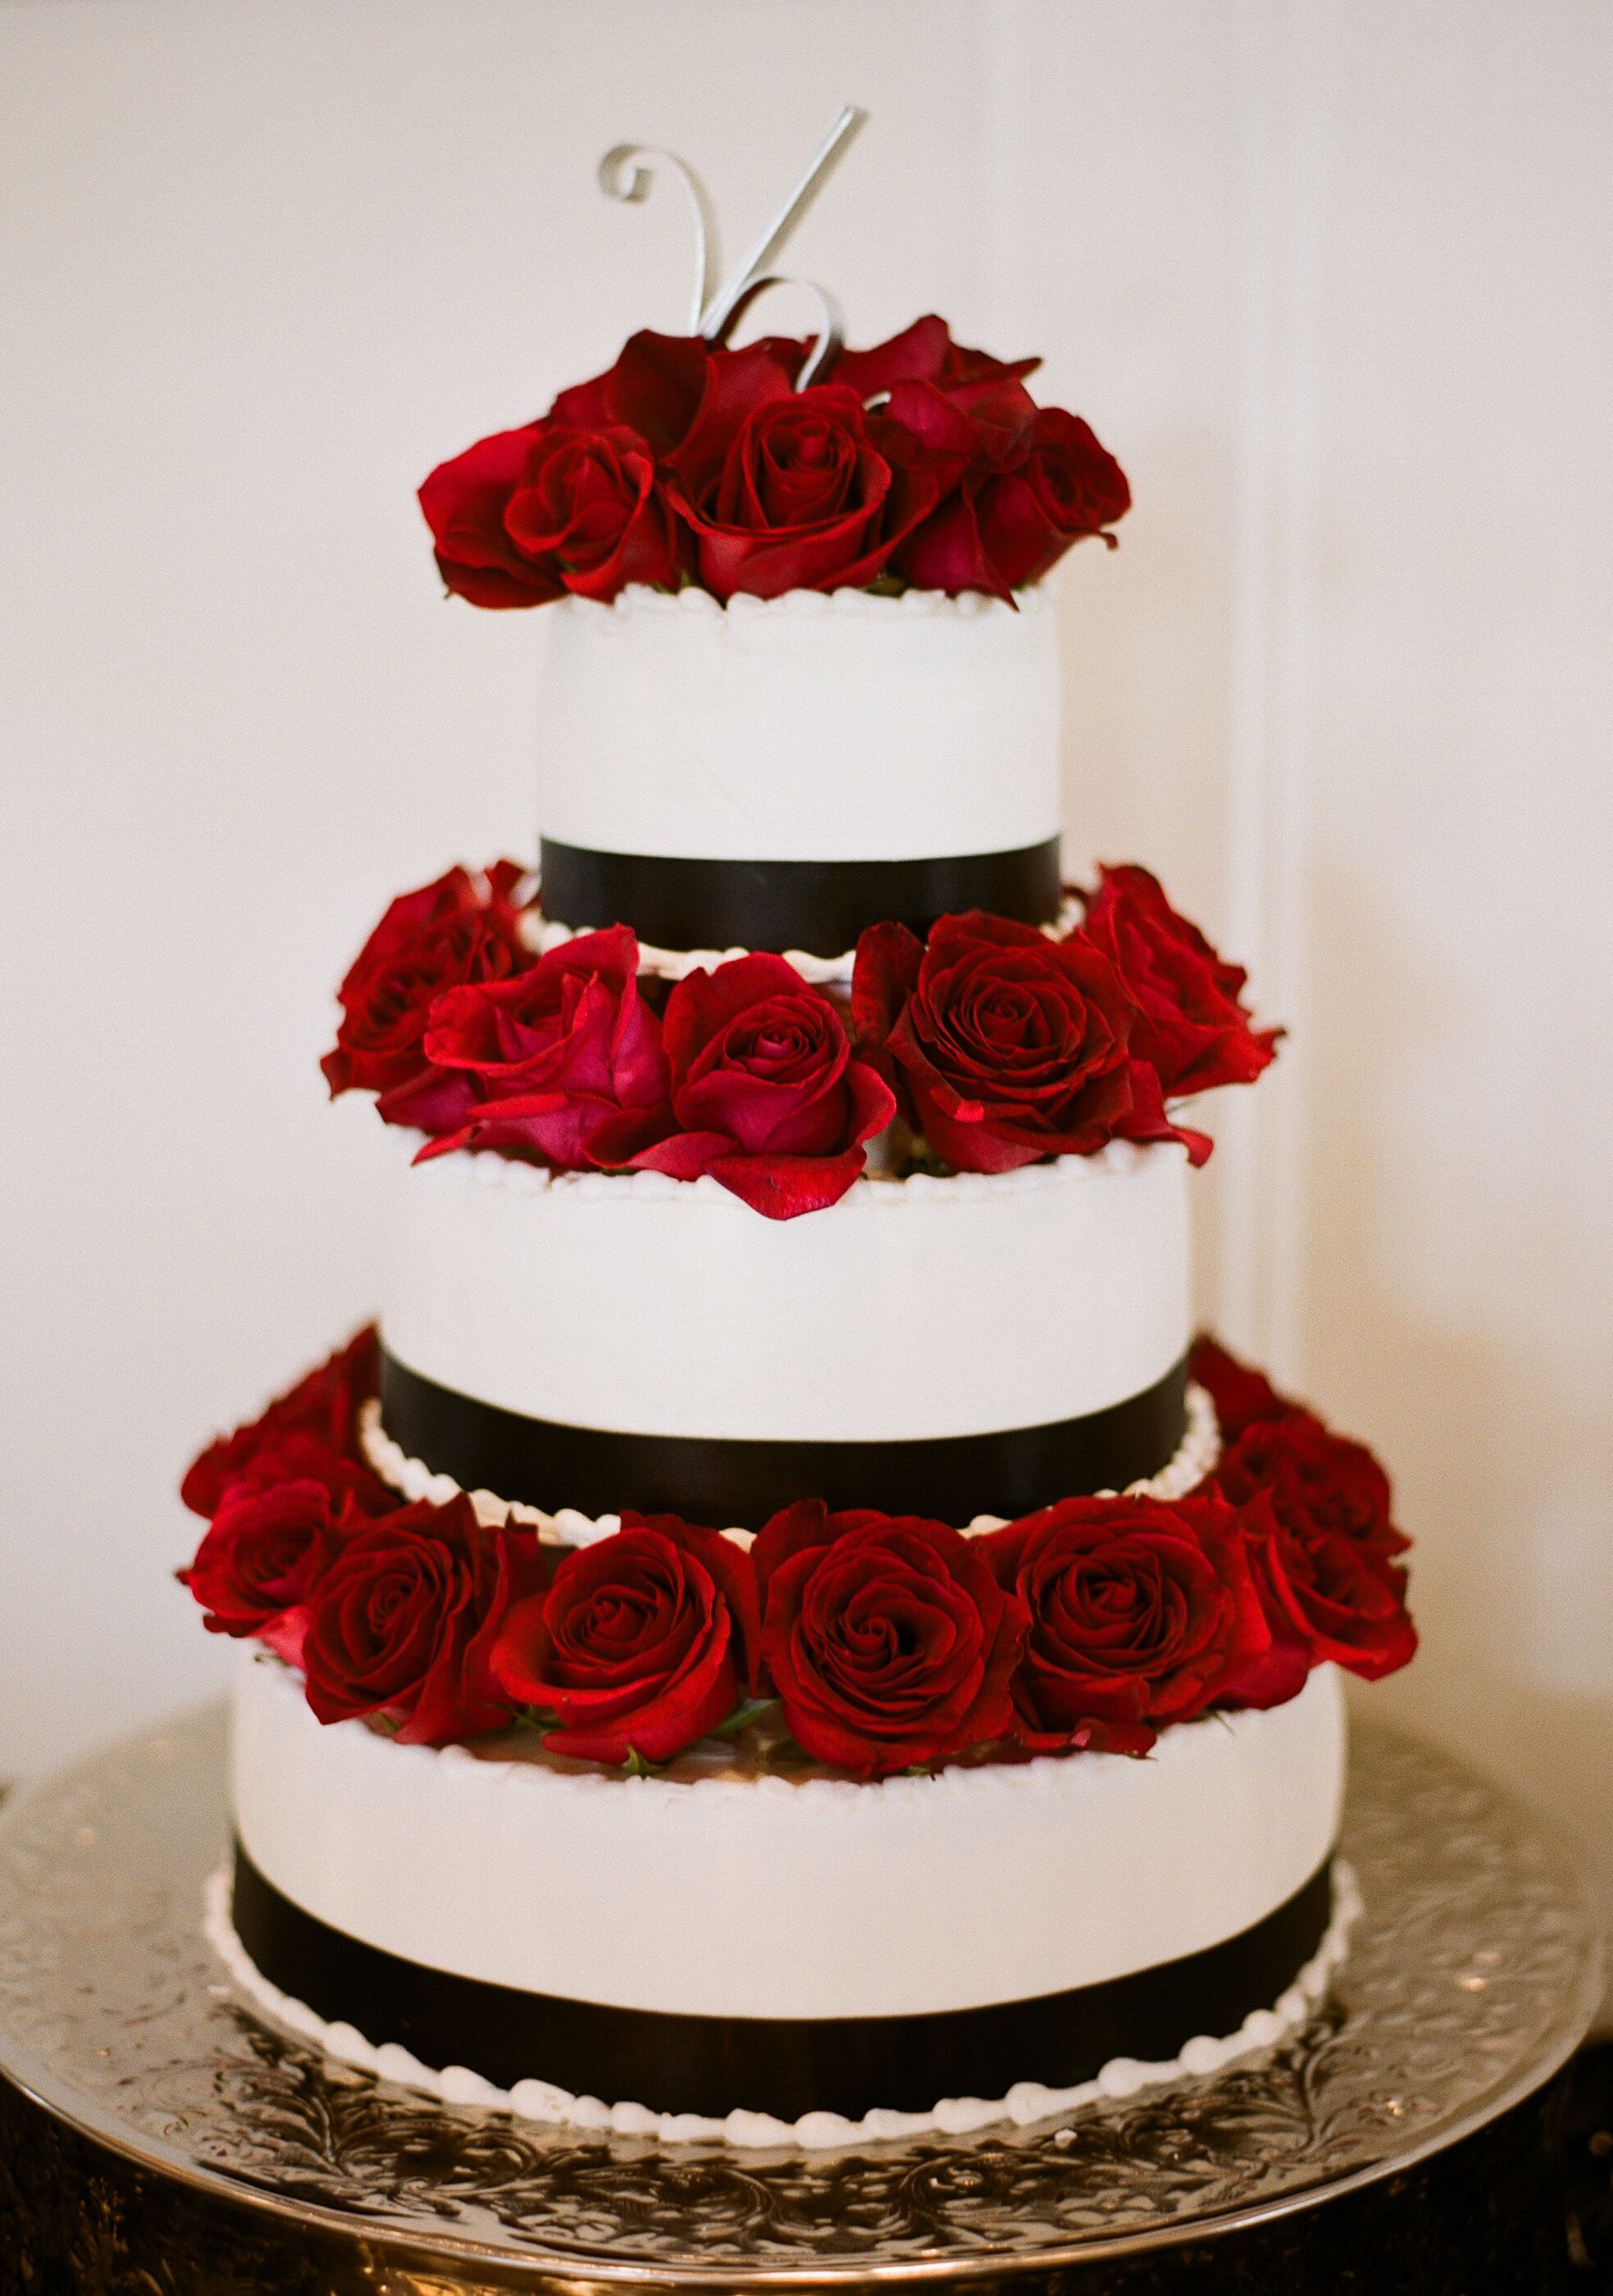 Black and White Wedding Cake With Red Roses 